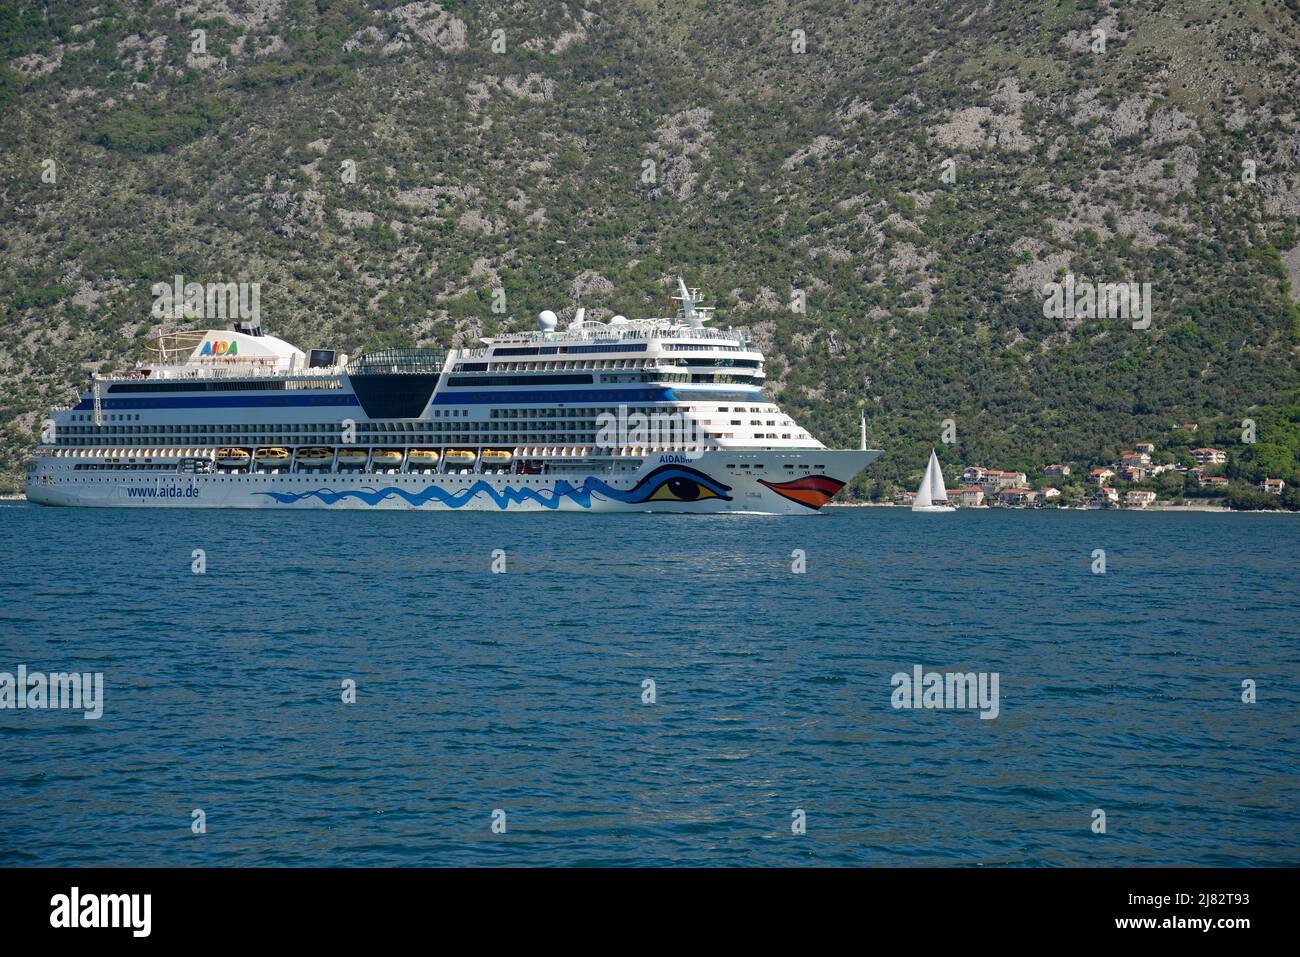 The Aida Blu cruise ship in the Bay of Kotor, Montenegro. A german cruise line vessel. Stock Photo